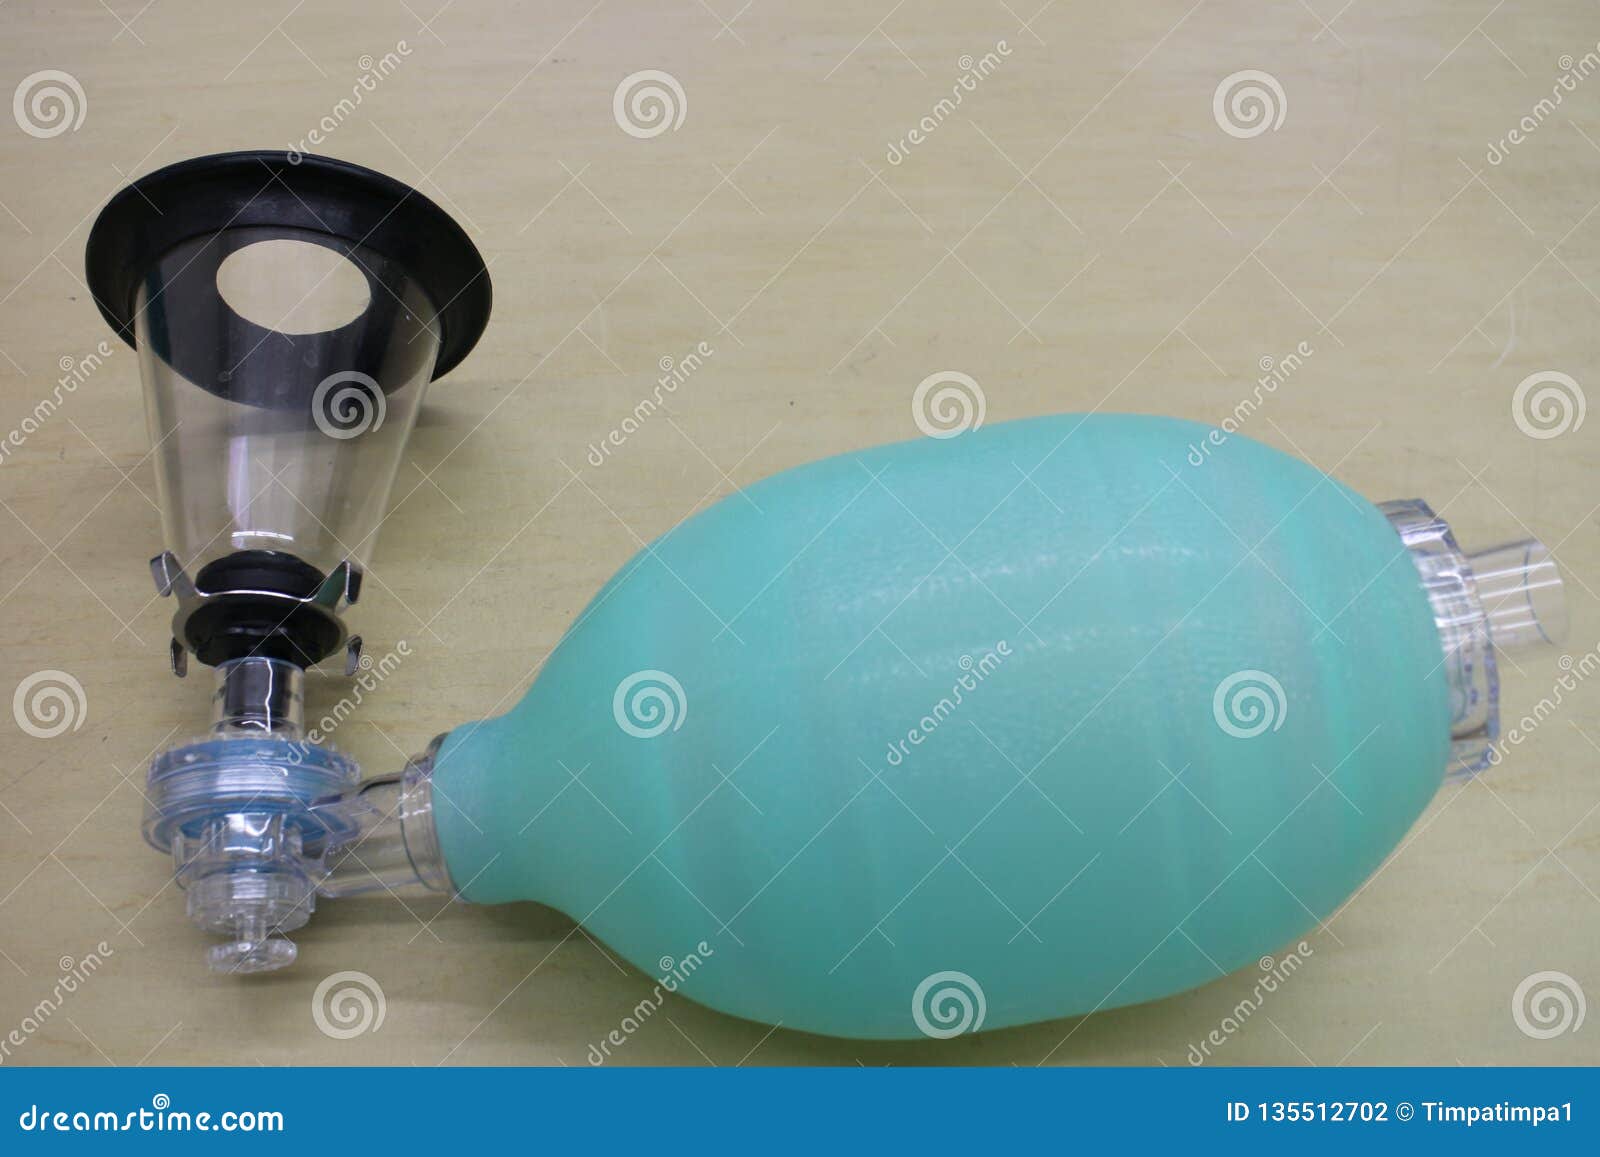 583 Bag Valve Mask Royalty-Free Images, Stock Photos & Pictures |  Shutterstock